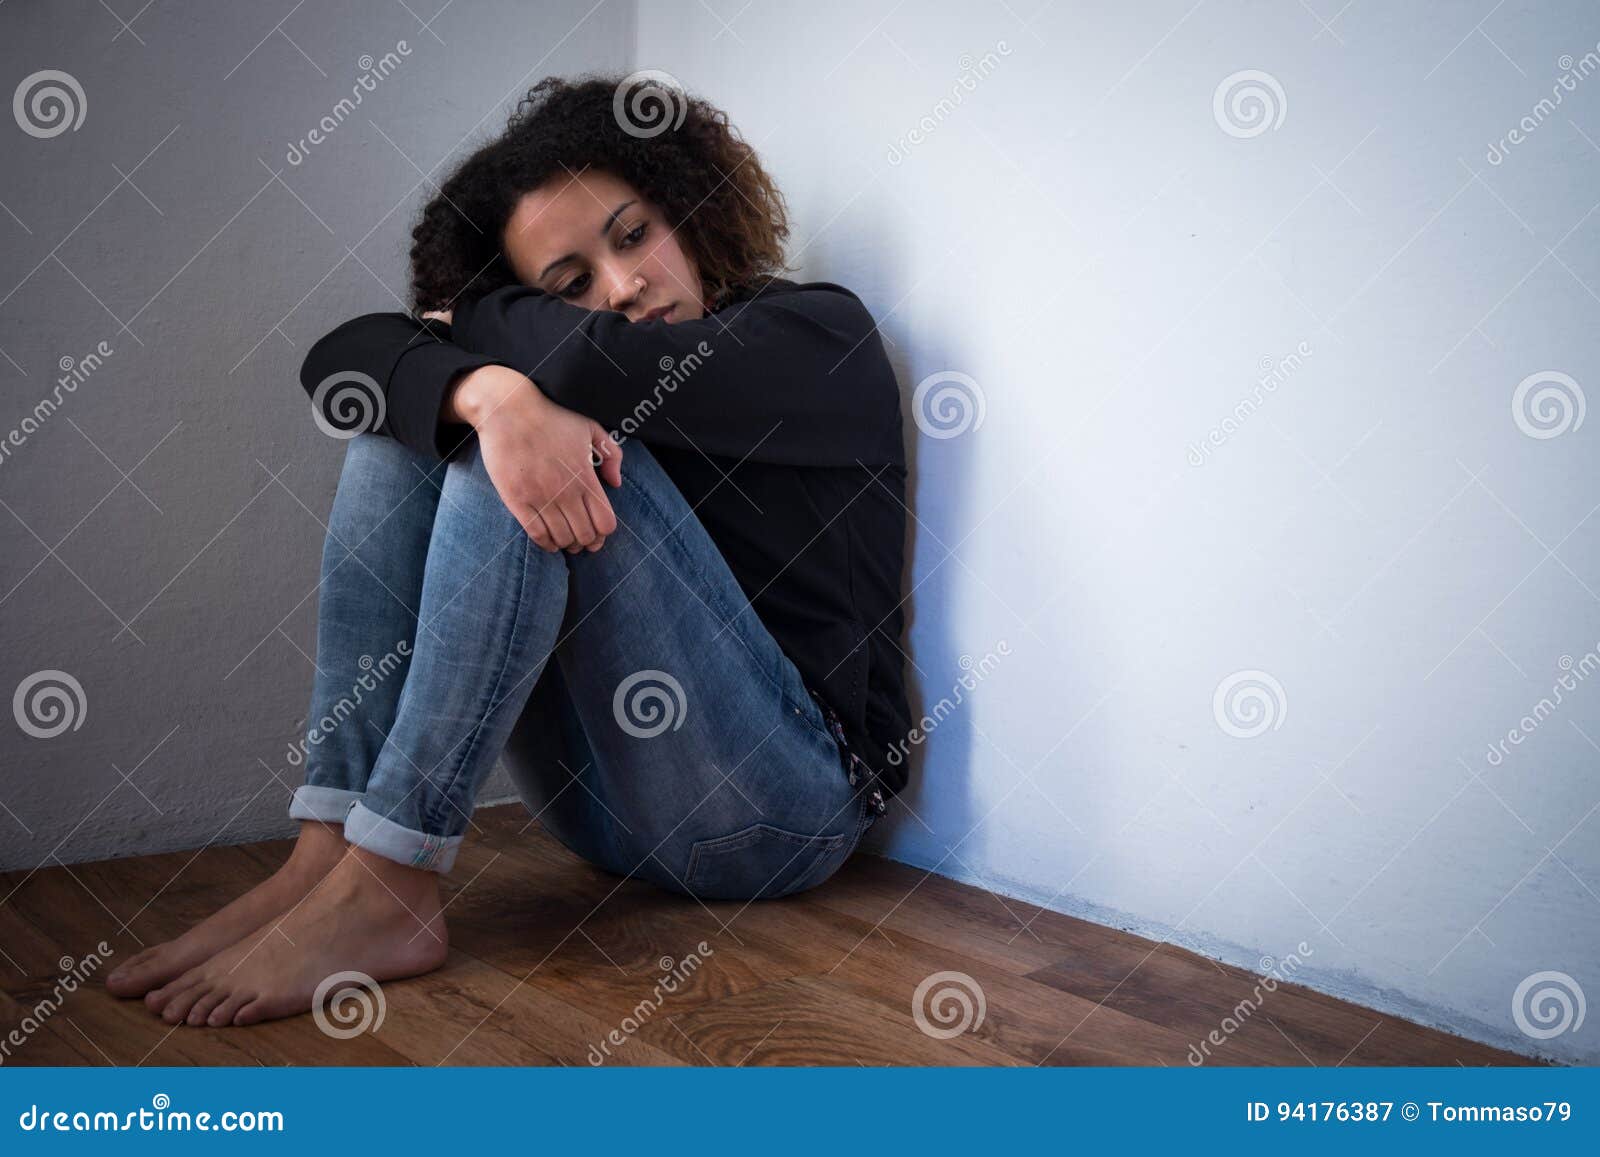 Sad and Lonely Young Girl Depressed Stock Image - Image of despair ...